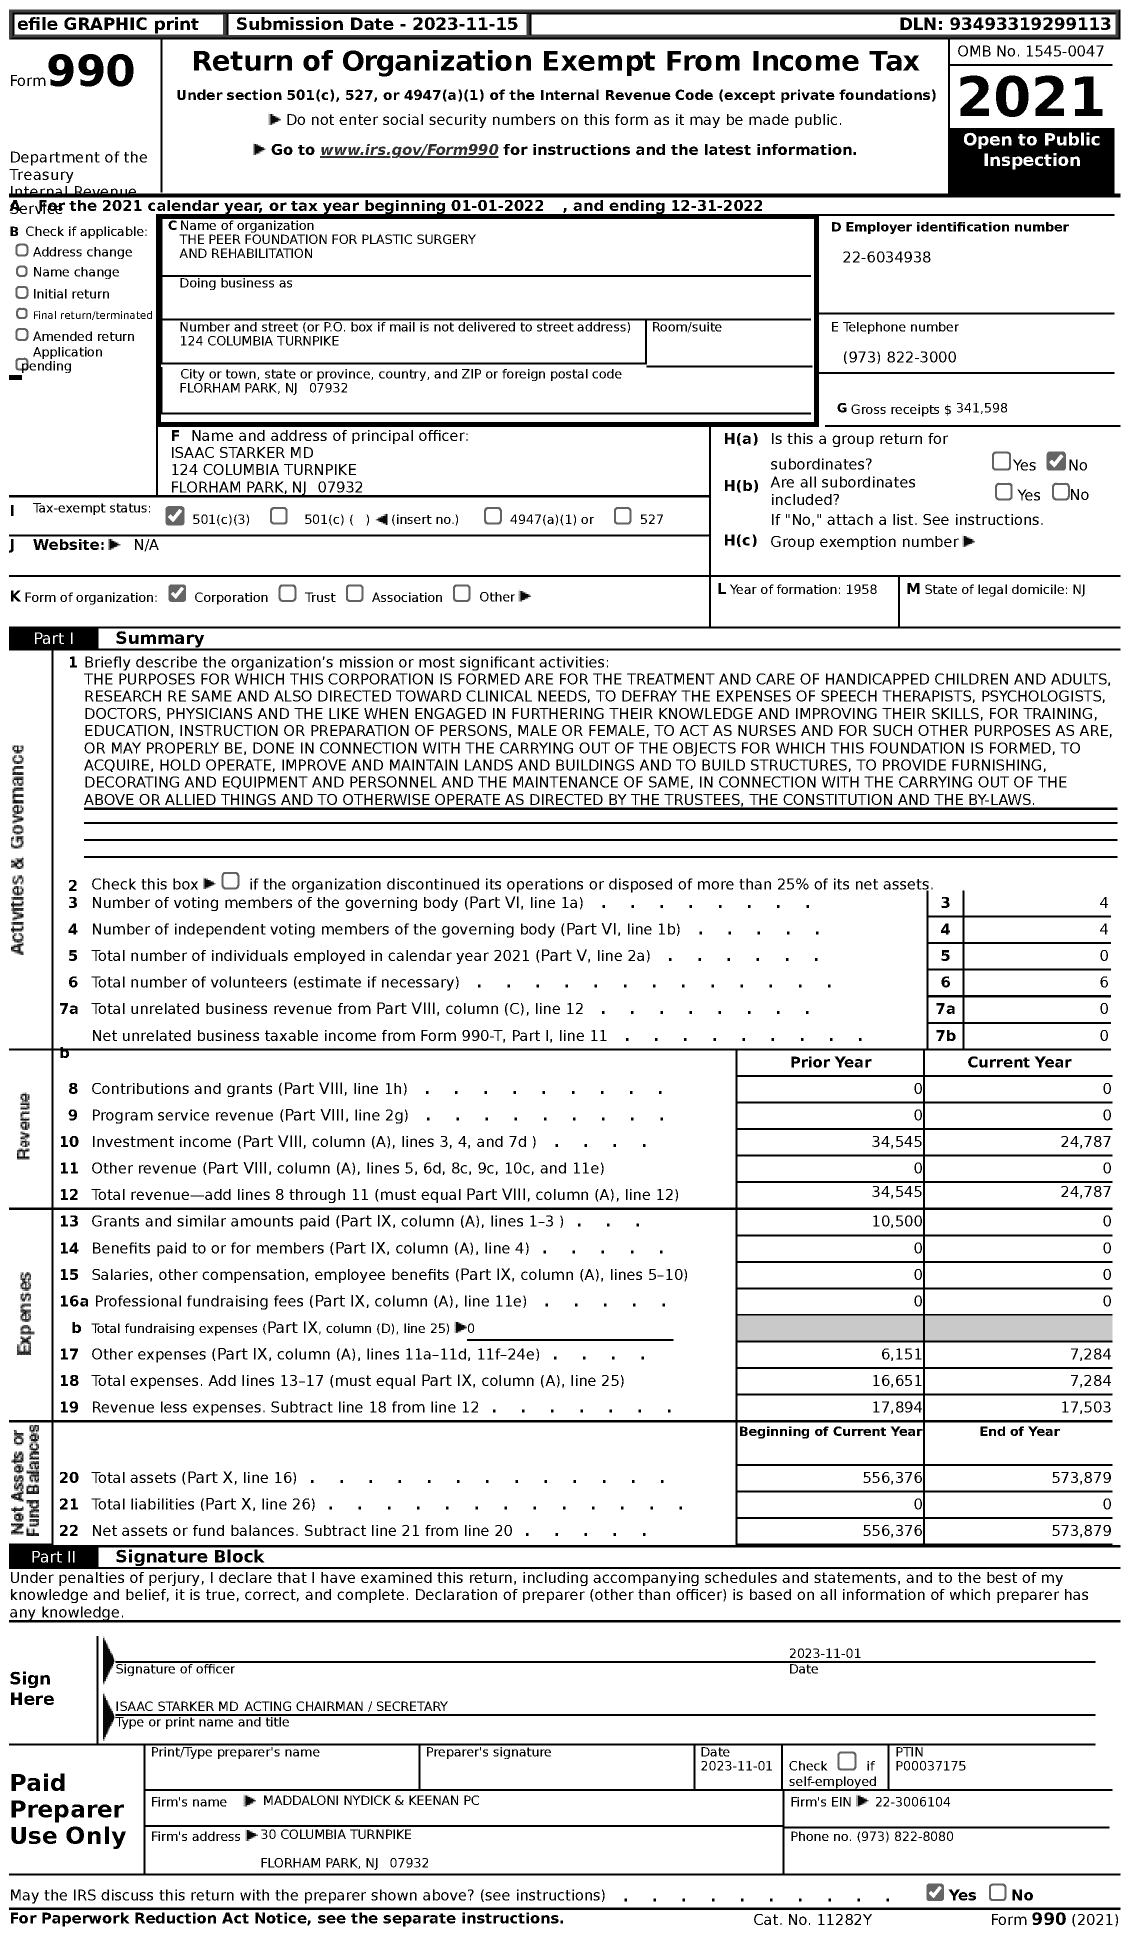 Image of first page of 2022 Form 990 for The Peer Foundation for Plastic Surgery and Rehabilitation